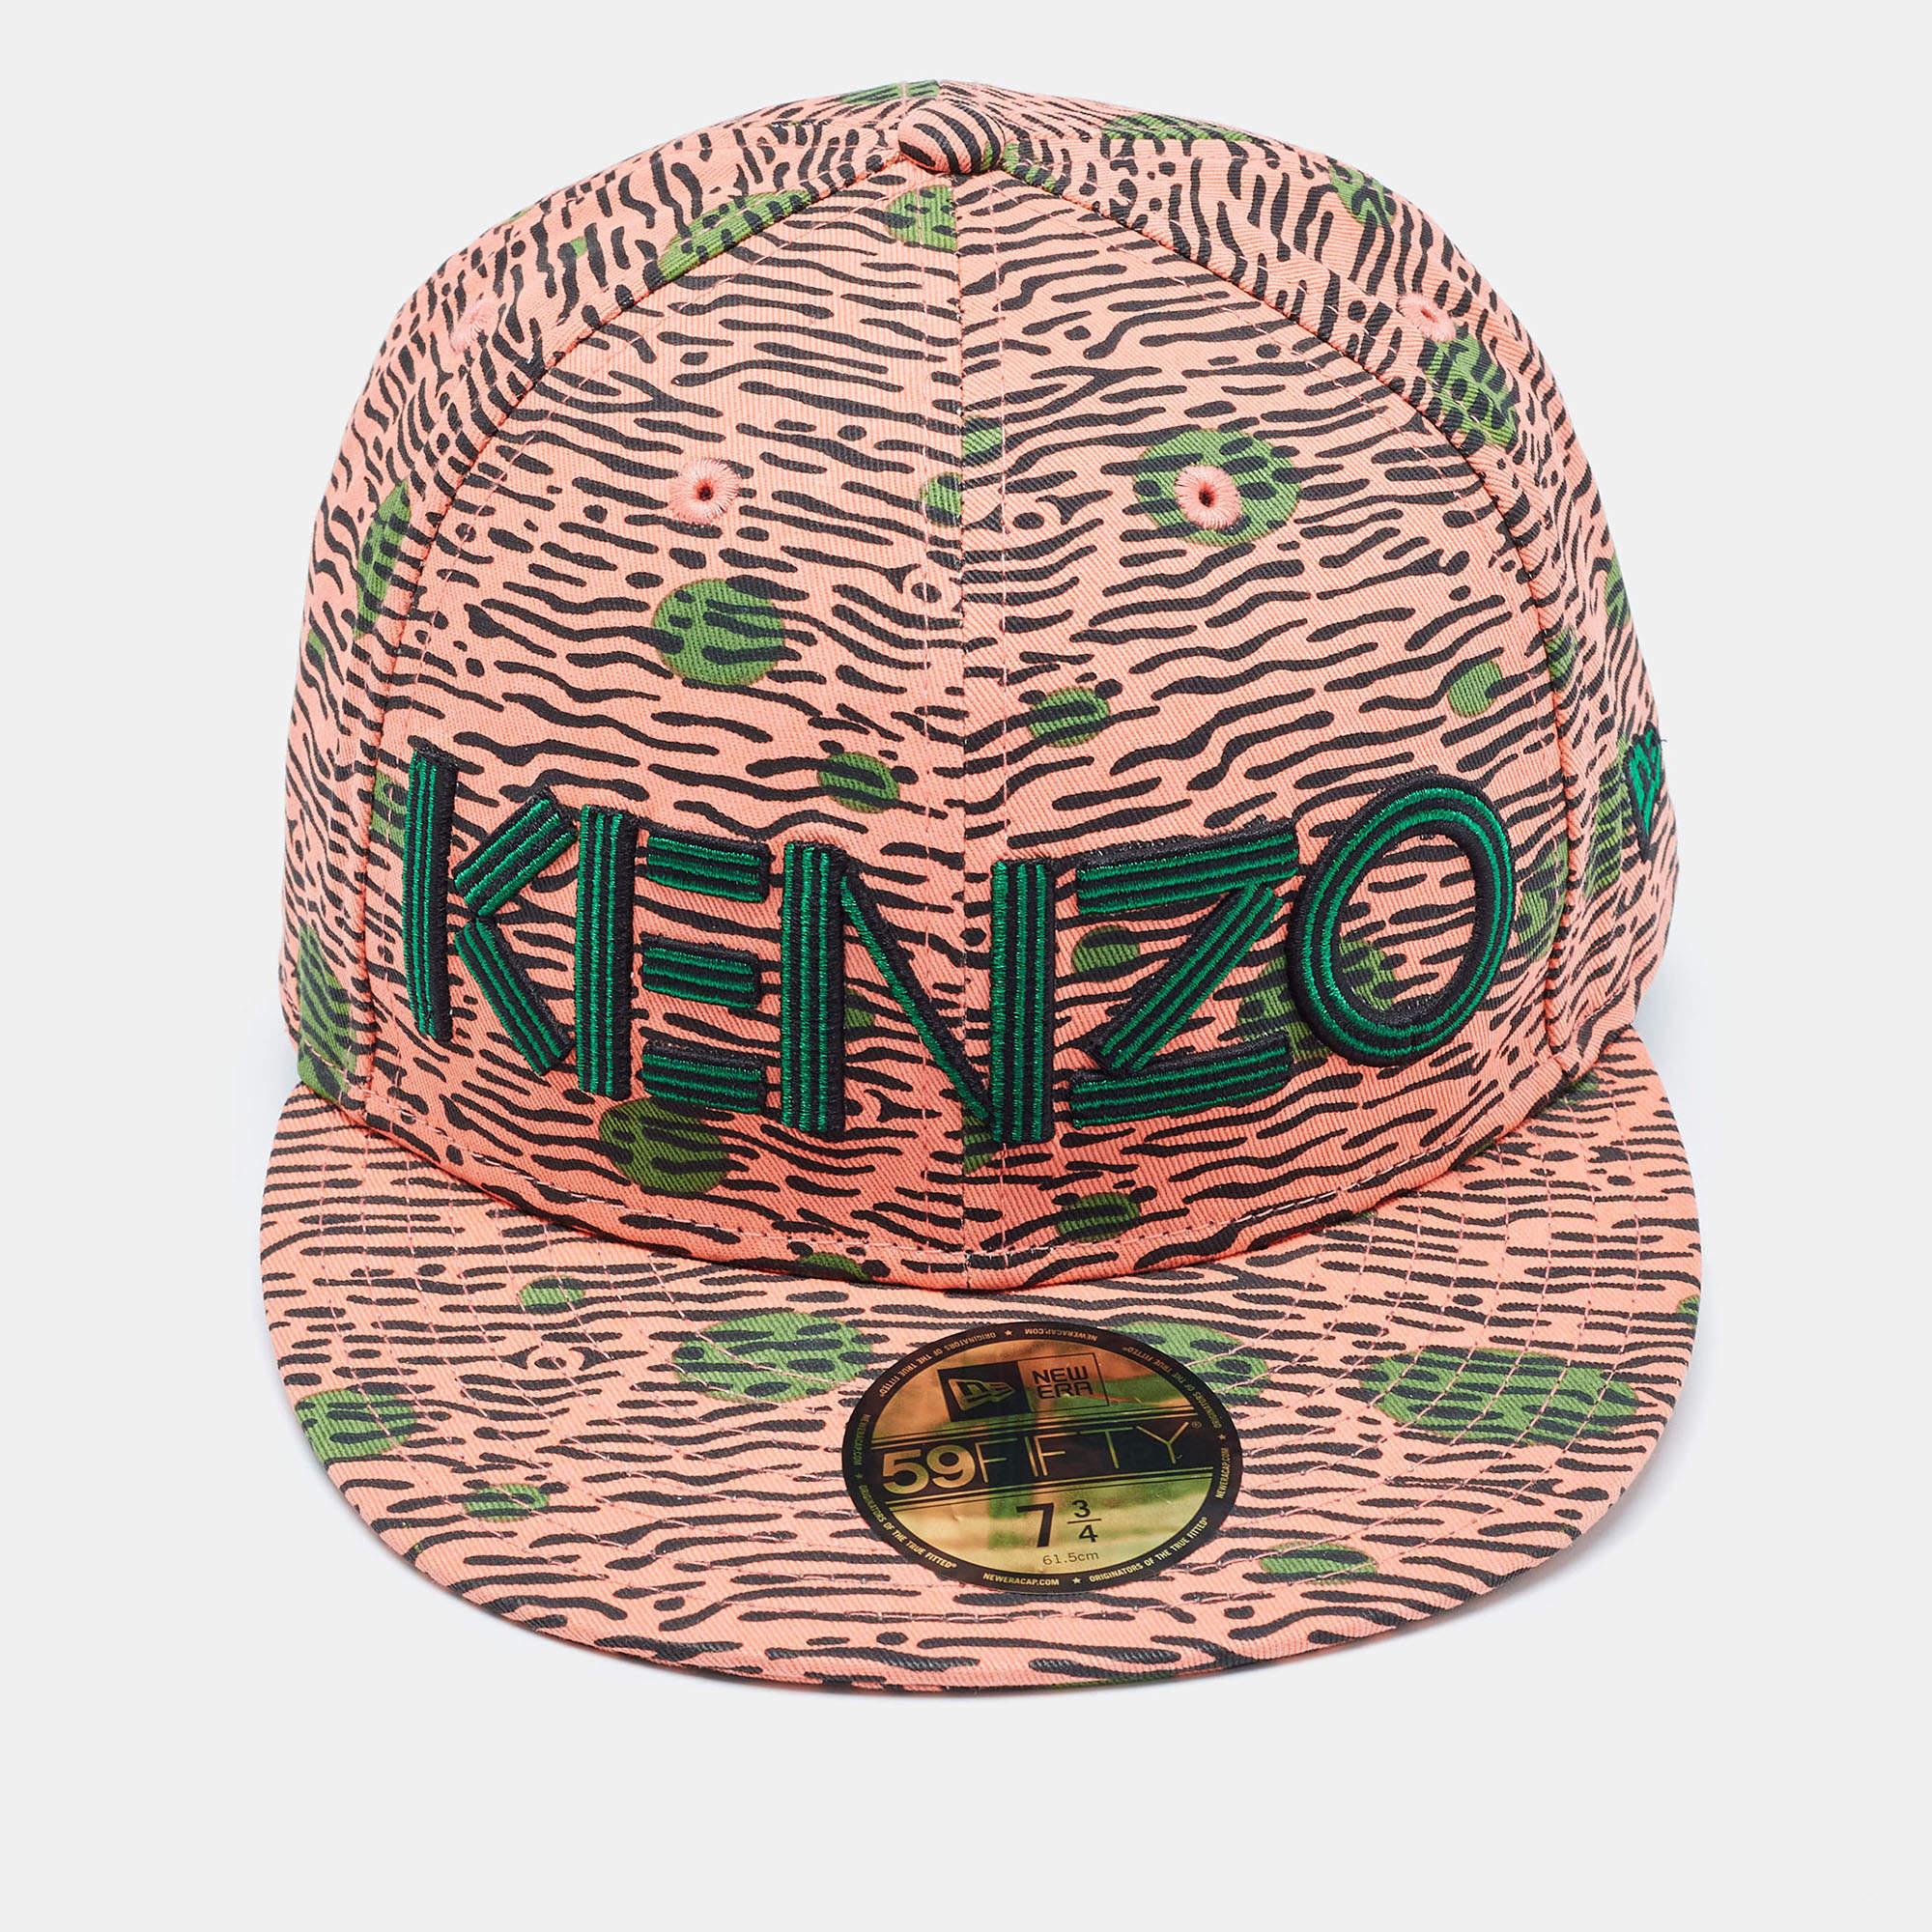 Embrace a casual day with luxurious fashion by adding this designer cap while you step out. Made from quality materials, it comes in a pink shade.

Includes: Brand Tag